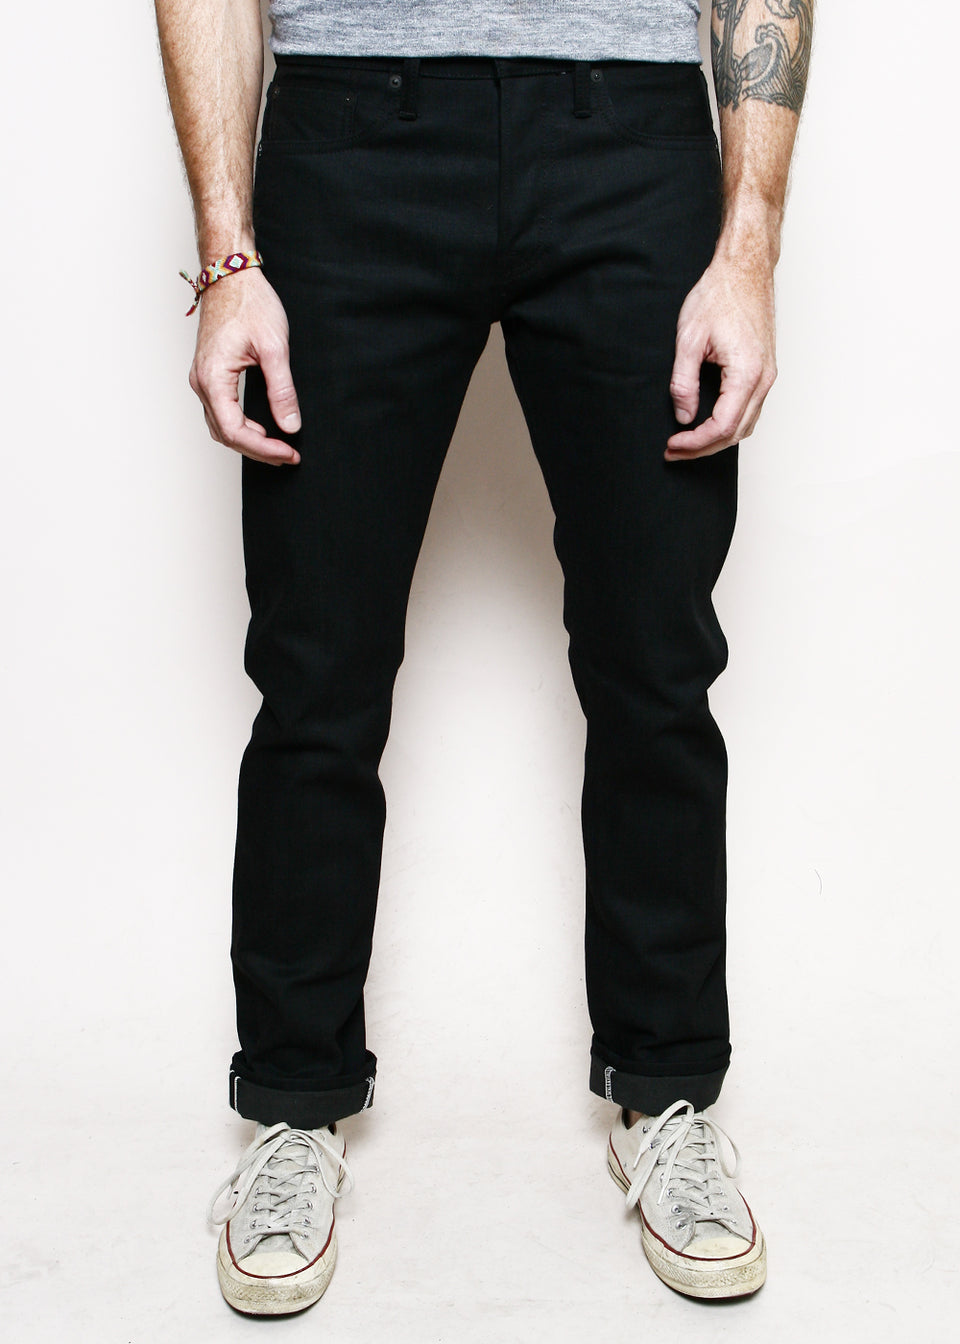 Stanton // 15oz Stealth – Rogue Territory